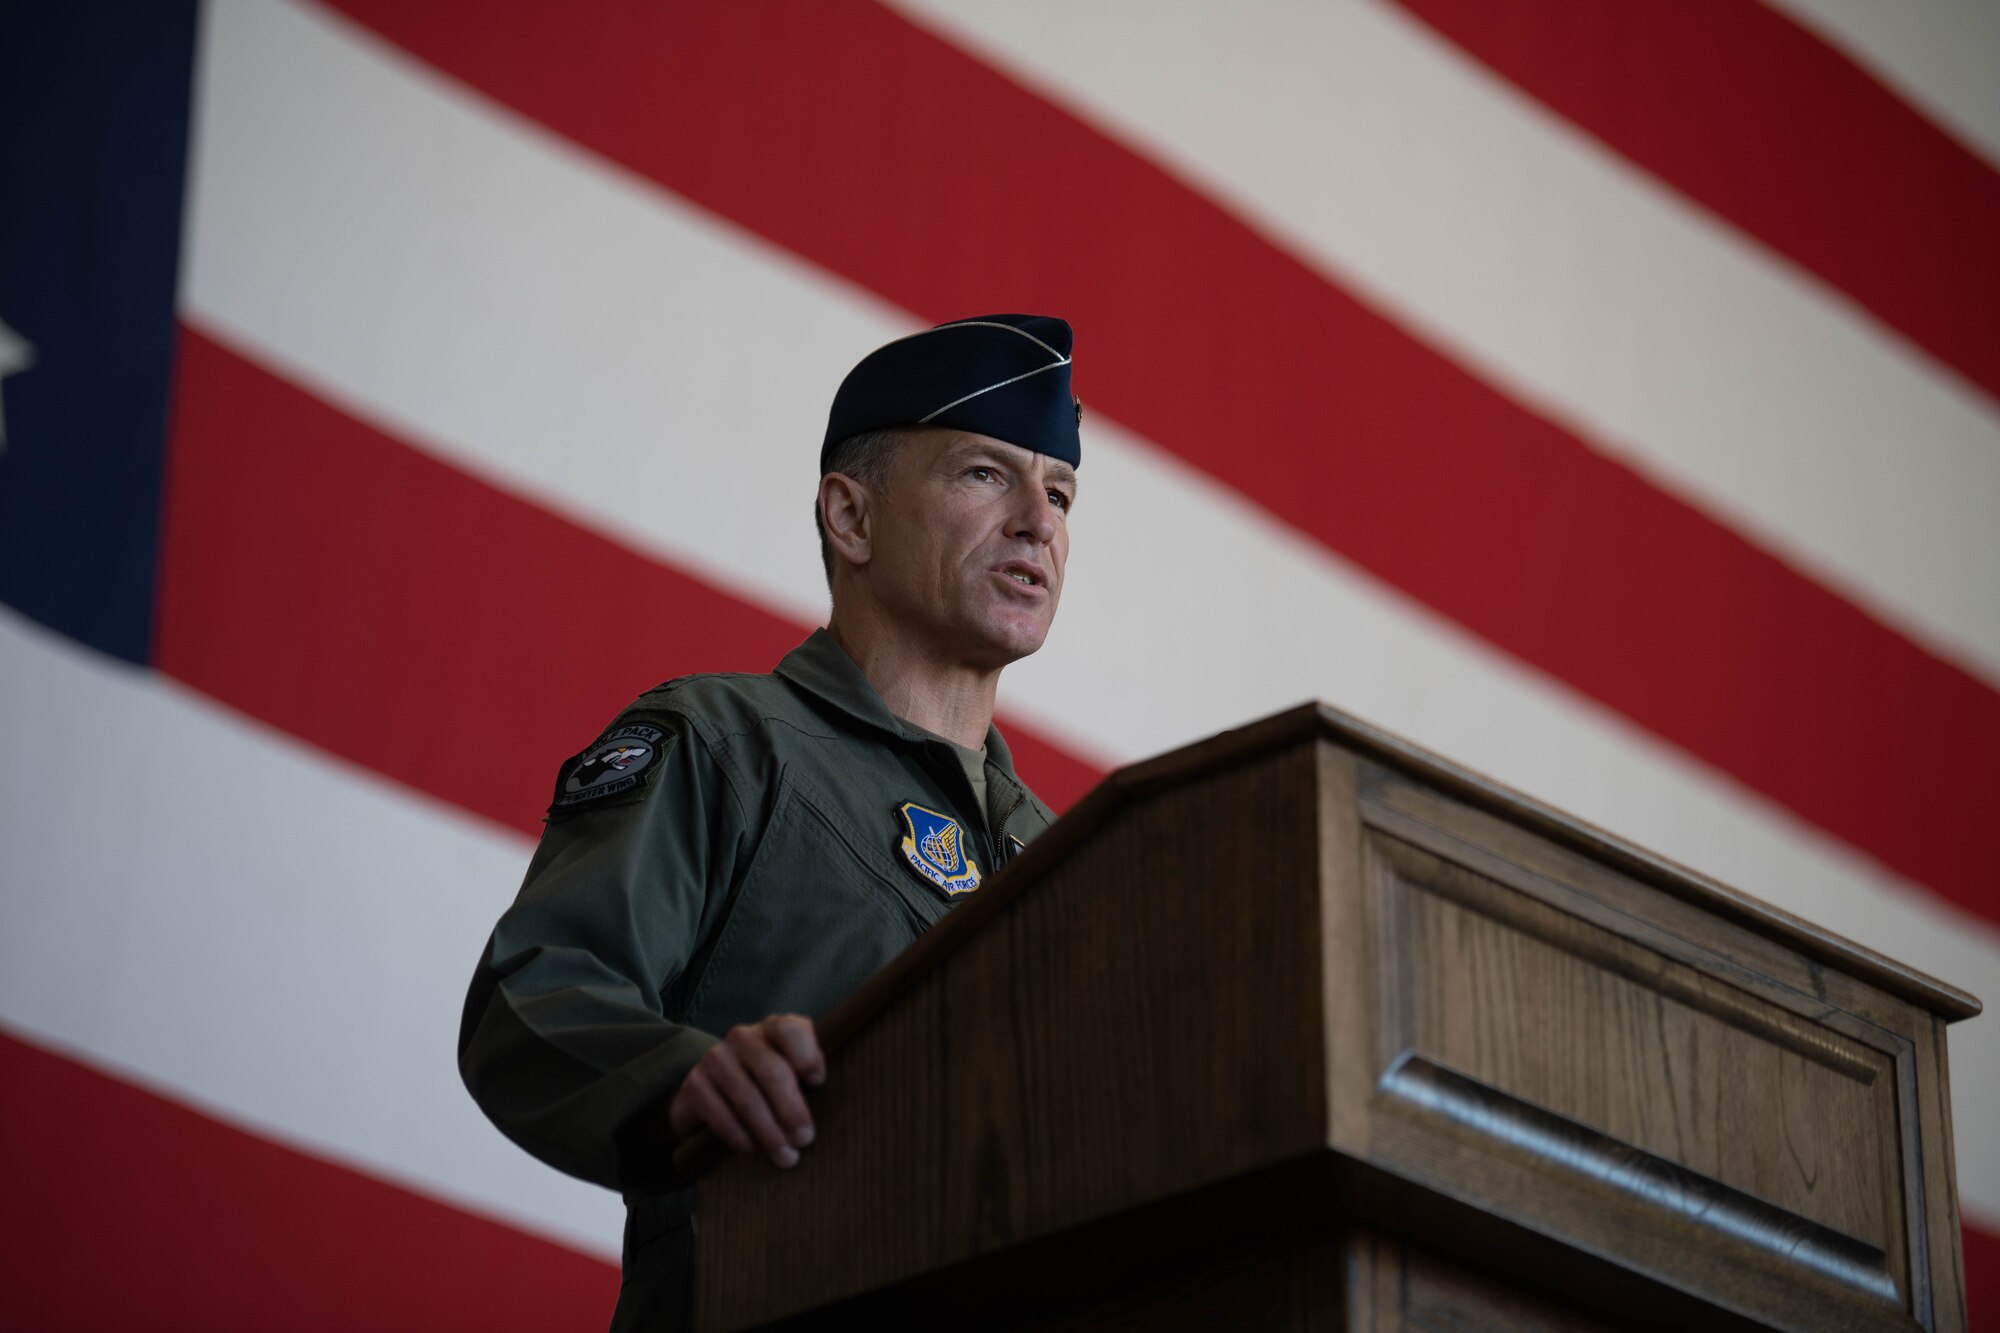 Lt. Gen. Scott Pleus, Seventh Air Force commander and presiding officer, speaks during the 8th Fighter Wing change of command ceremony at Kunsan Air Base, Republic of Korea, May 26, 2022. Col. Henry R. Jeffress, III, 8th FW incoming commander, assumed command from outgoing commander, Col. John B. Gallemore. (U.S. Air Force Photo by Senior Airman Shannon Braaten)